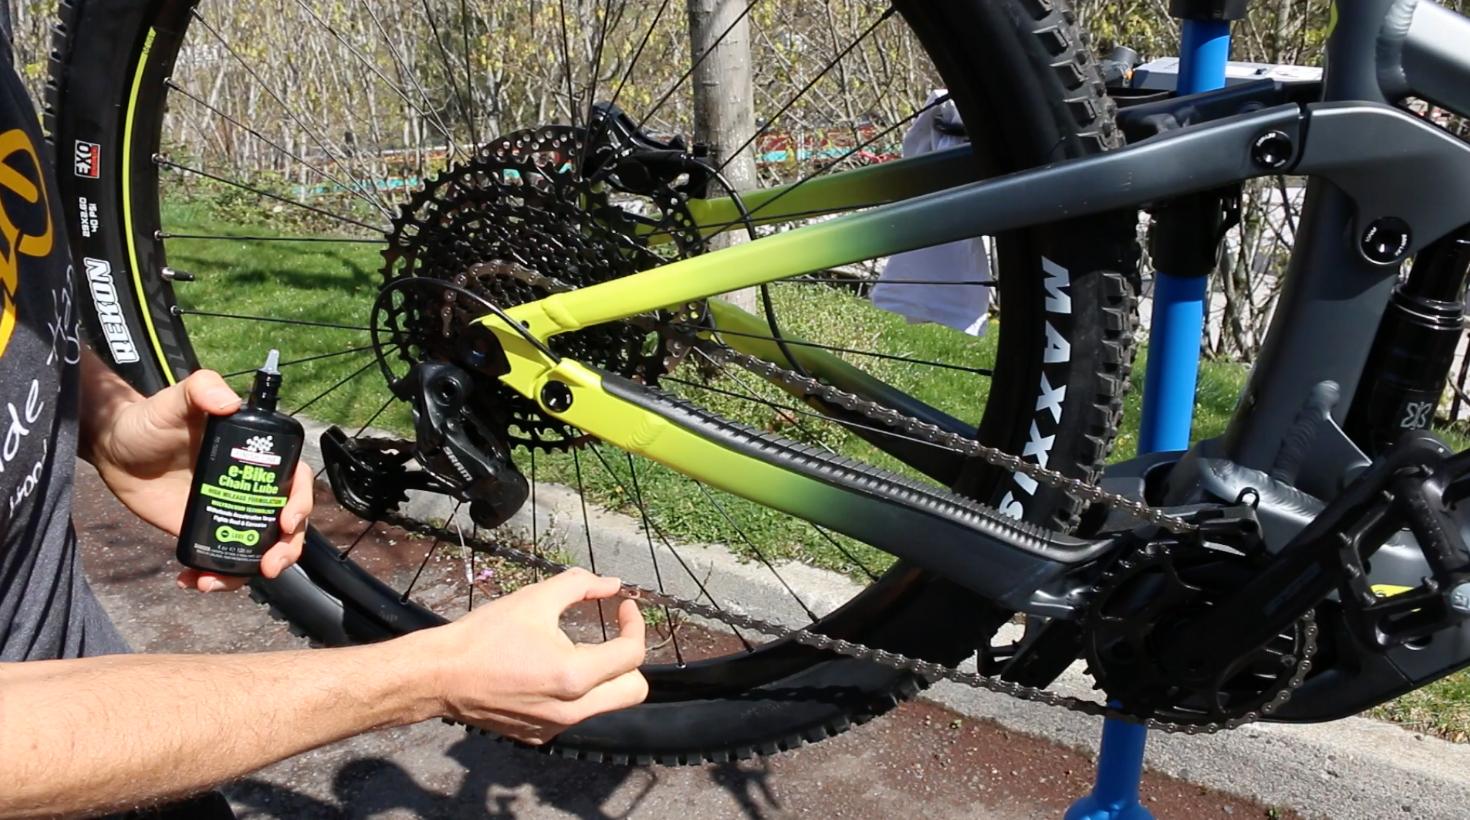 Tech Tip Thursday: How to lube your e-bike chain